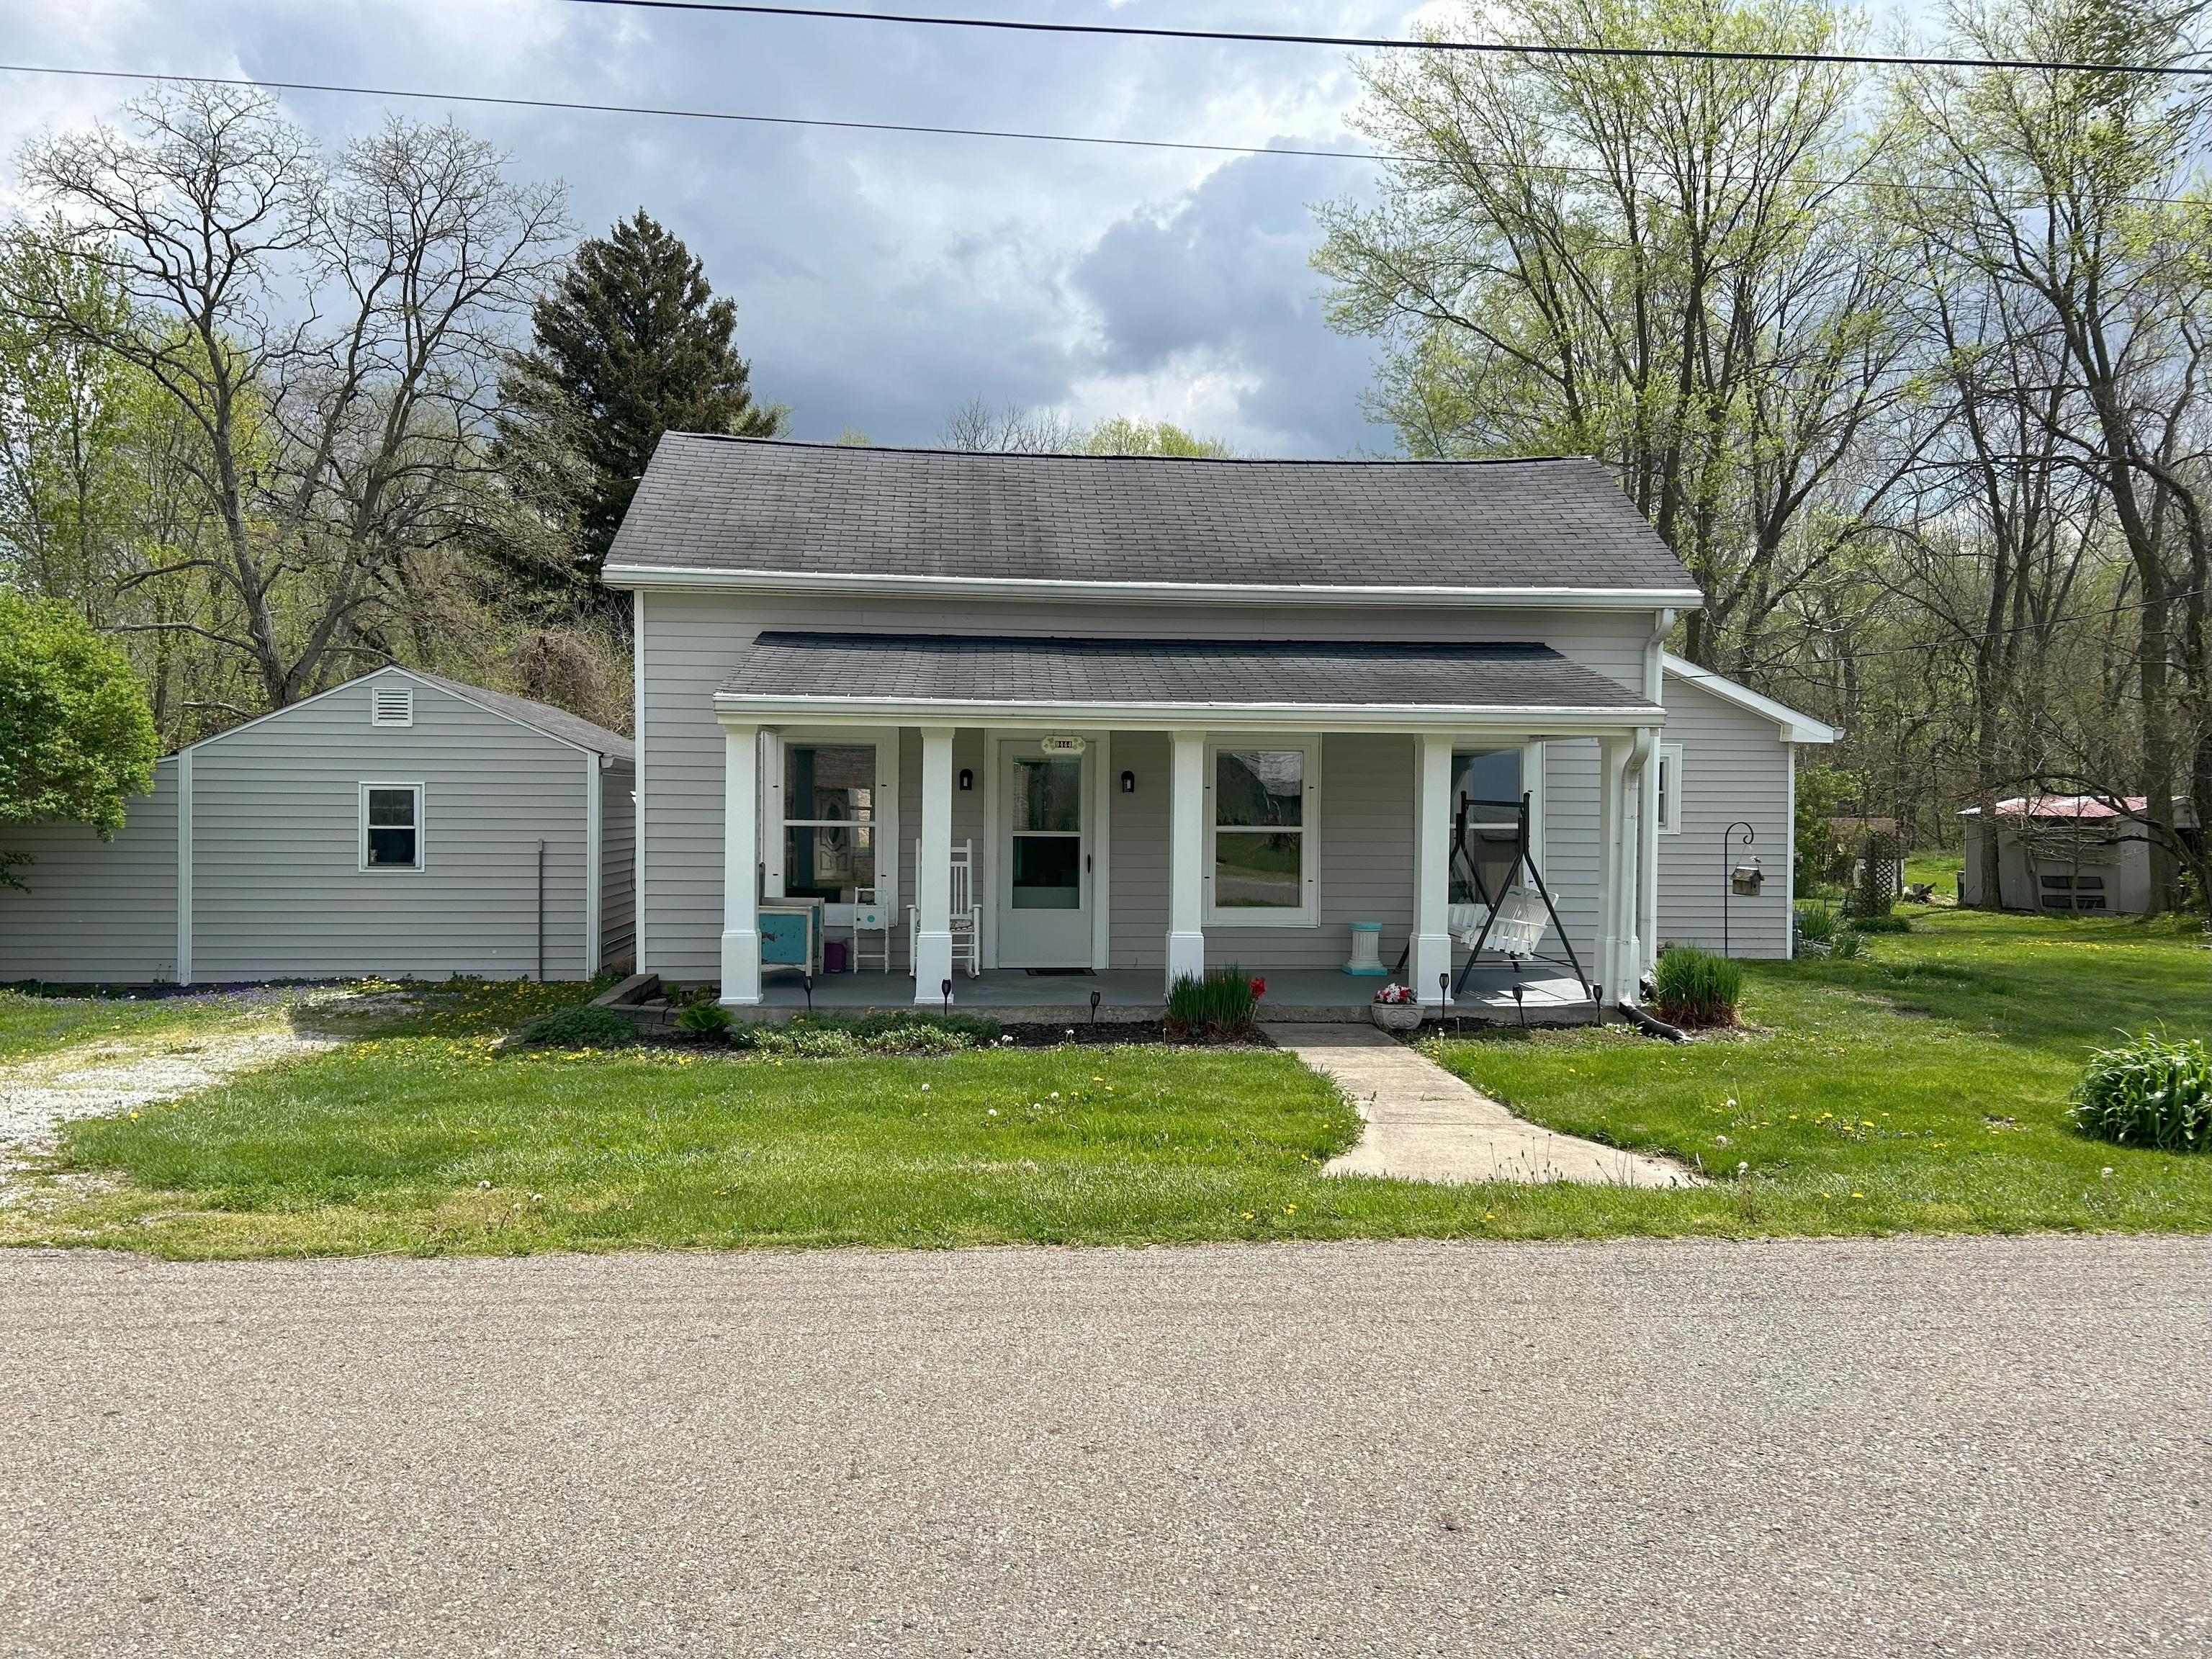 Photo of 9444 N 300 E, Morristown, IN 46161